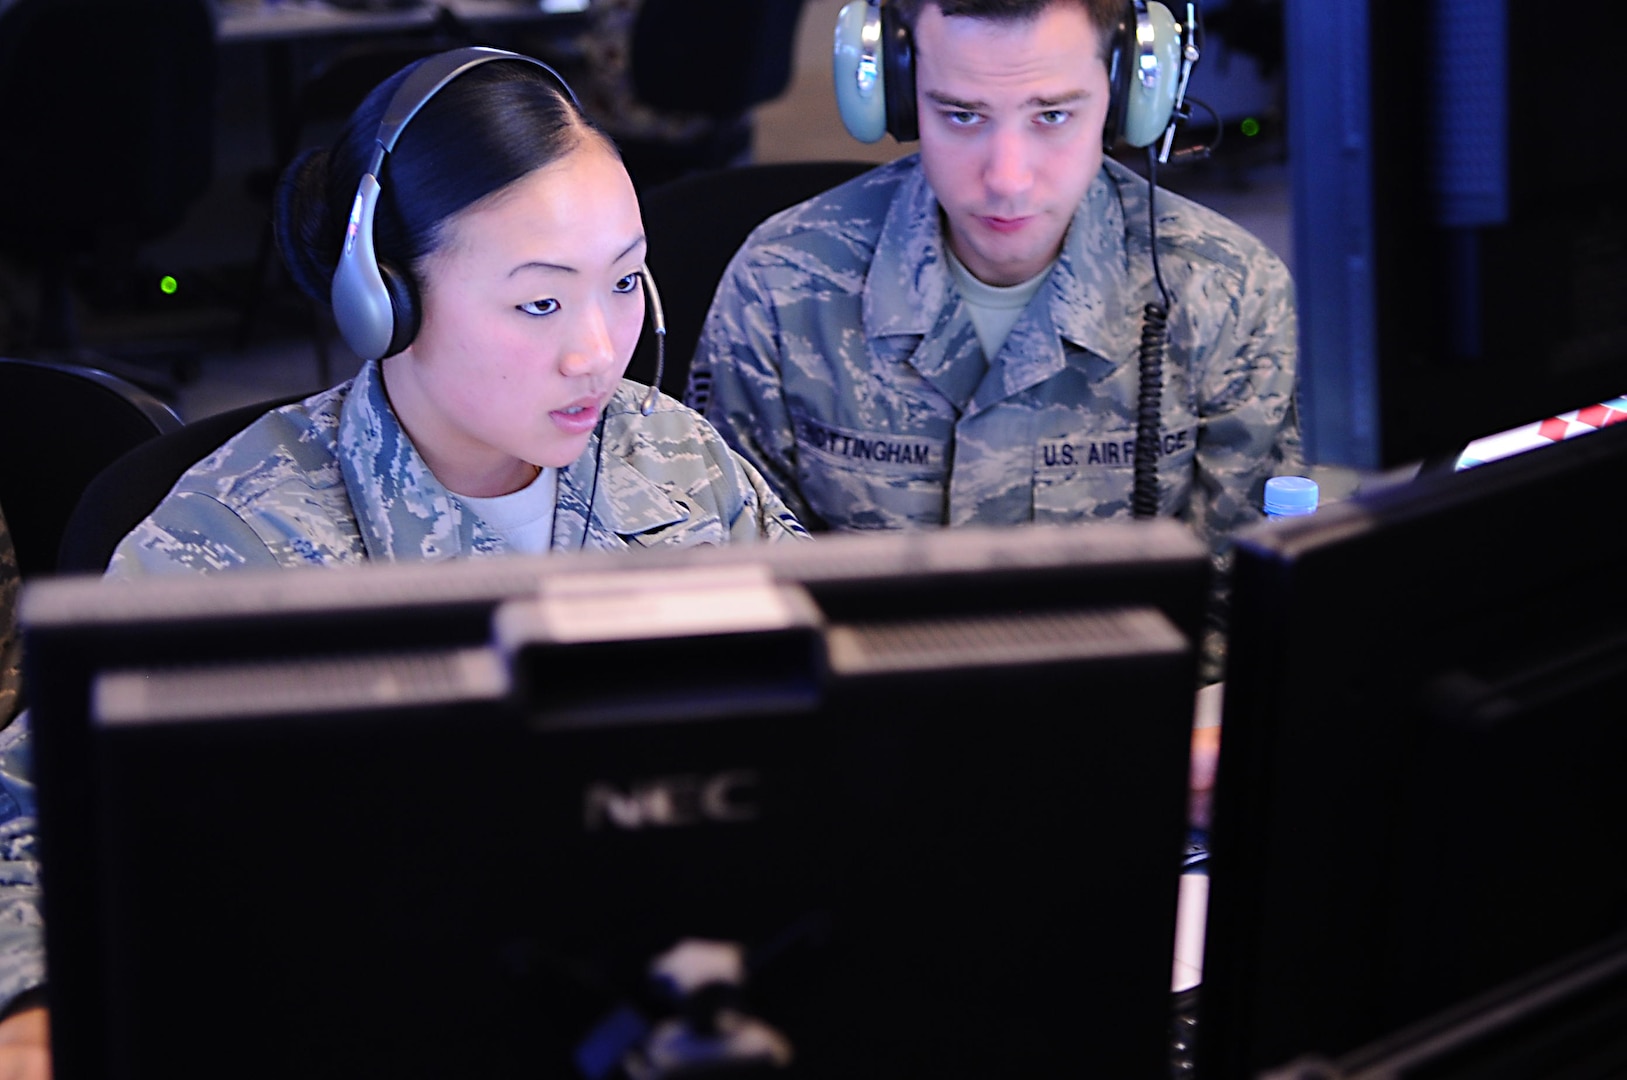 Senior Airman Jennifer Anderson (left) and Staff Sgt. Zachary Nottingham, 71st Expeditionary Air Control Squadron weapons directors, communicate with downrange aircraft from a non-disclosed Southwest Asia location 13 January 2010. The weapons directors help provide troops on the ground with appropriate air support. (Photo by SrA Kasey Zickmund, USAF)